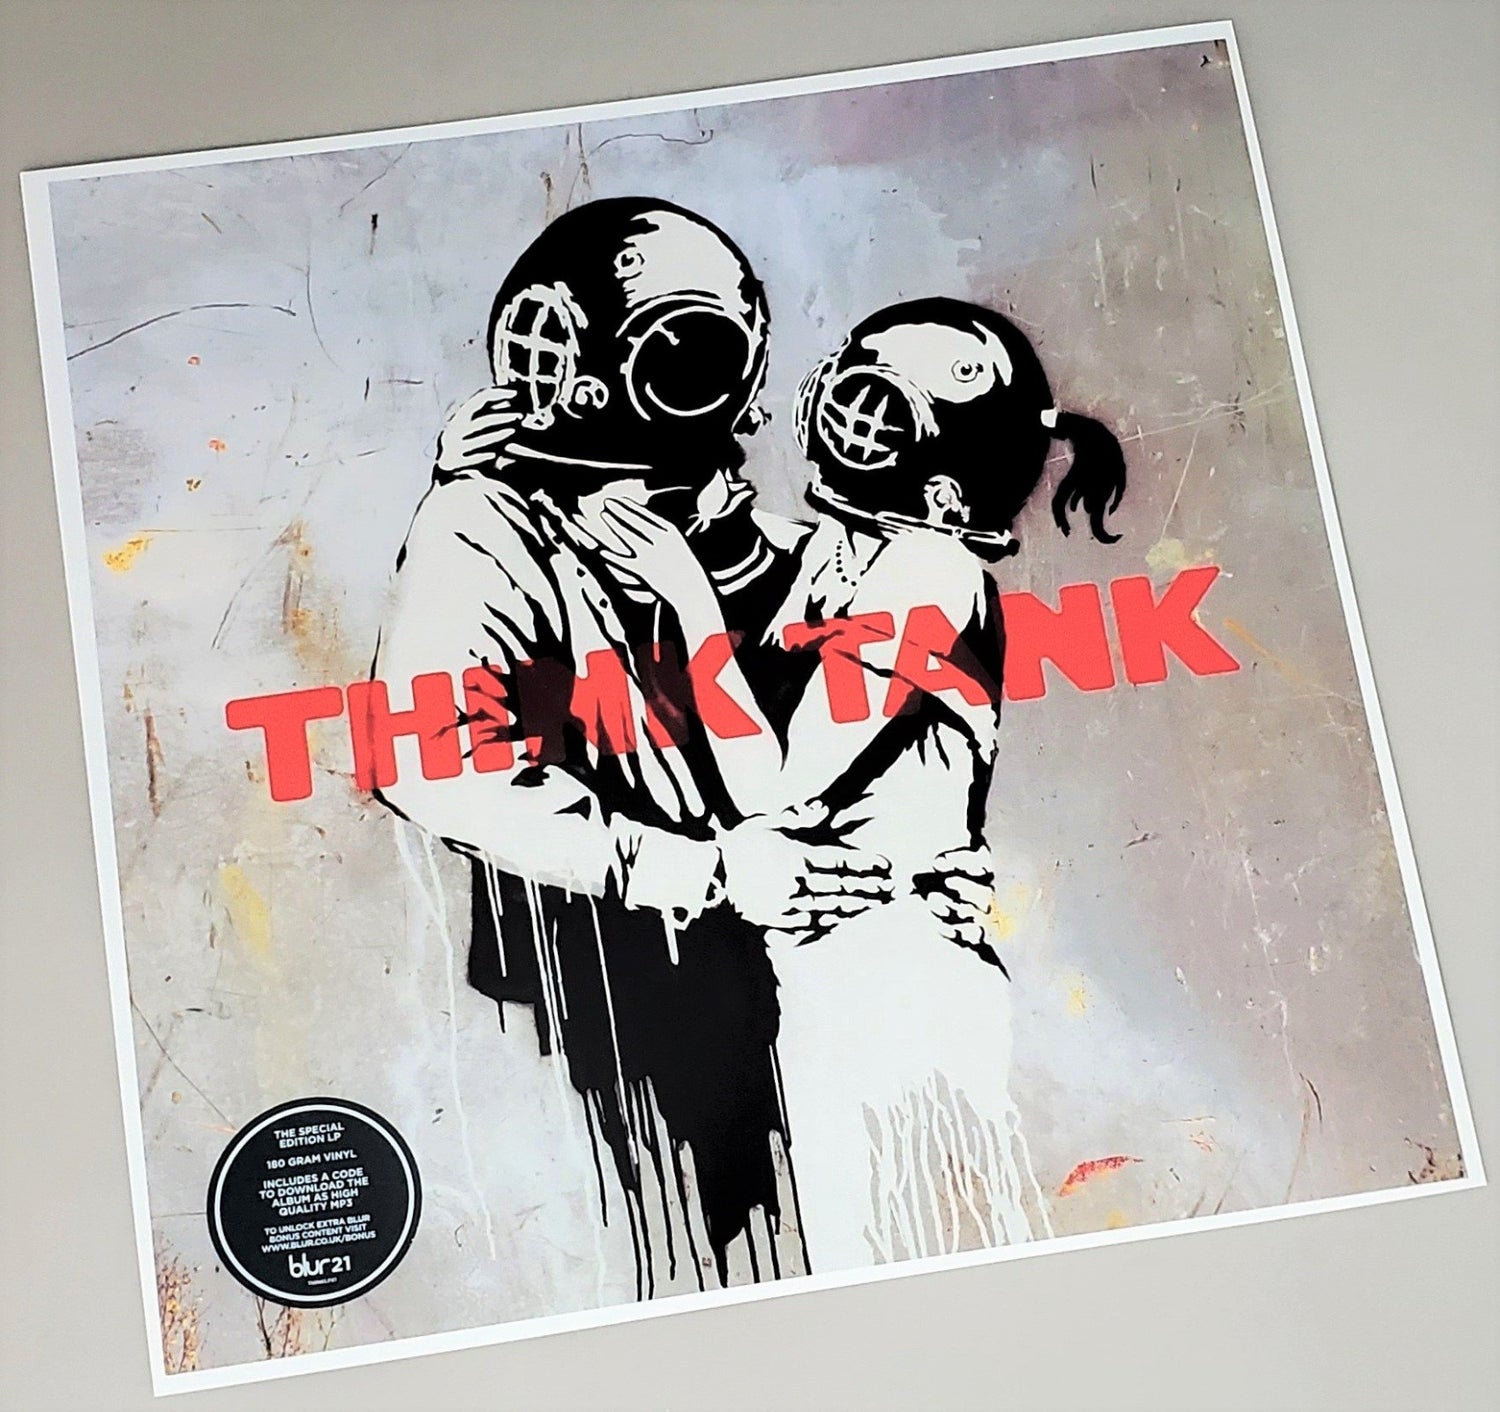 Blur 2003 Think Tank limited edition CD cover original page art featured in 2017 Art Record Covers 